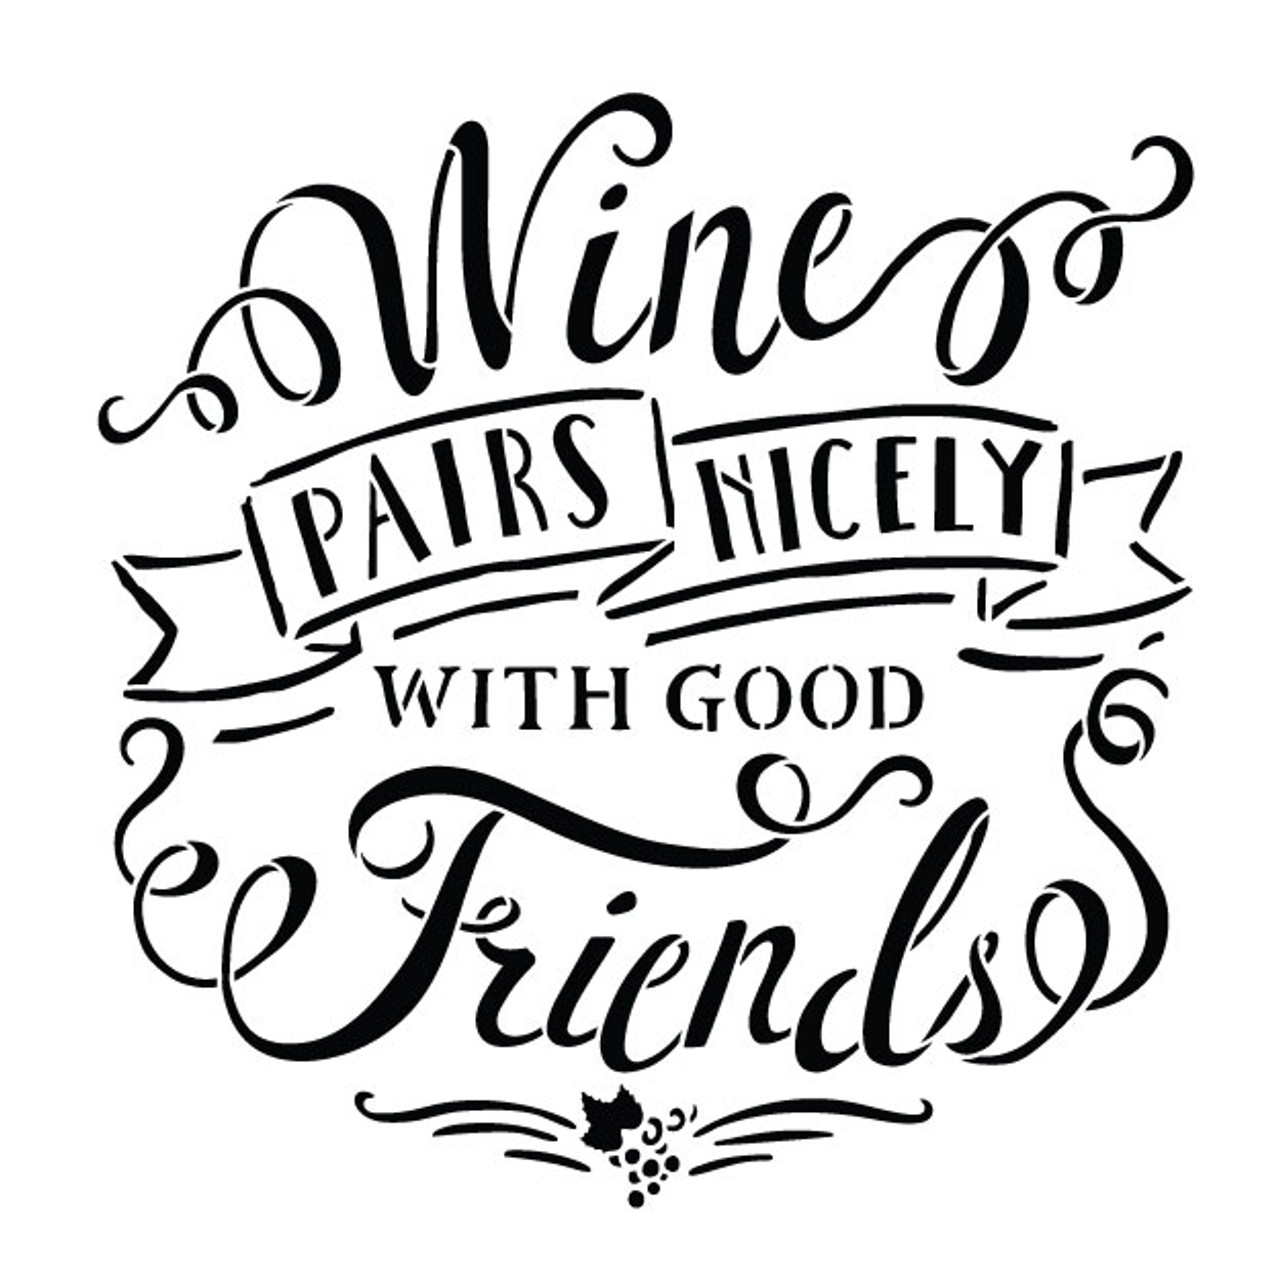 Wine Pairs Nicely With Good Friends - 18" x 18" - STCL1461_4 - by StudioR12